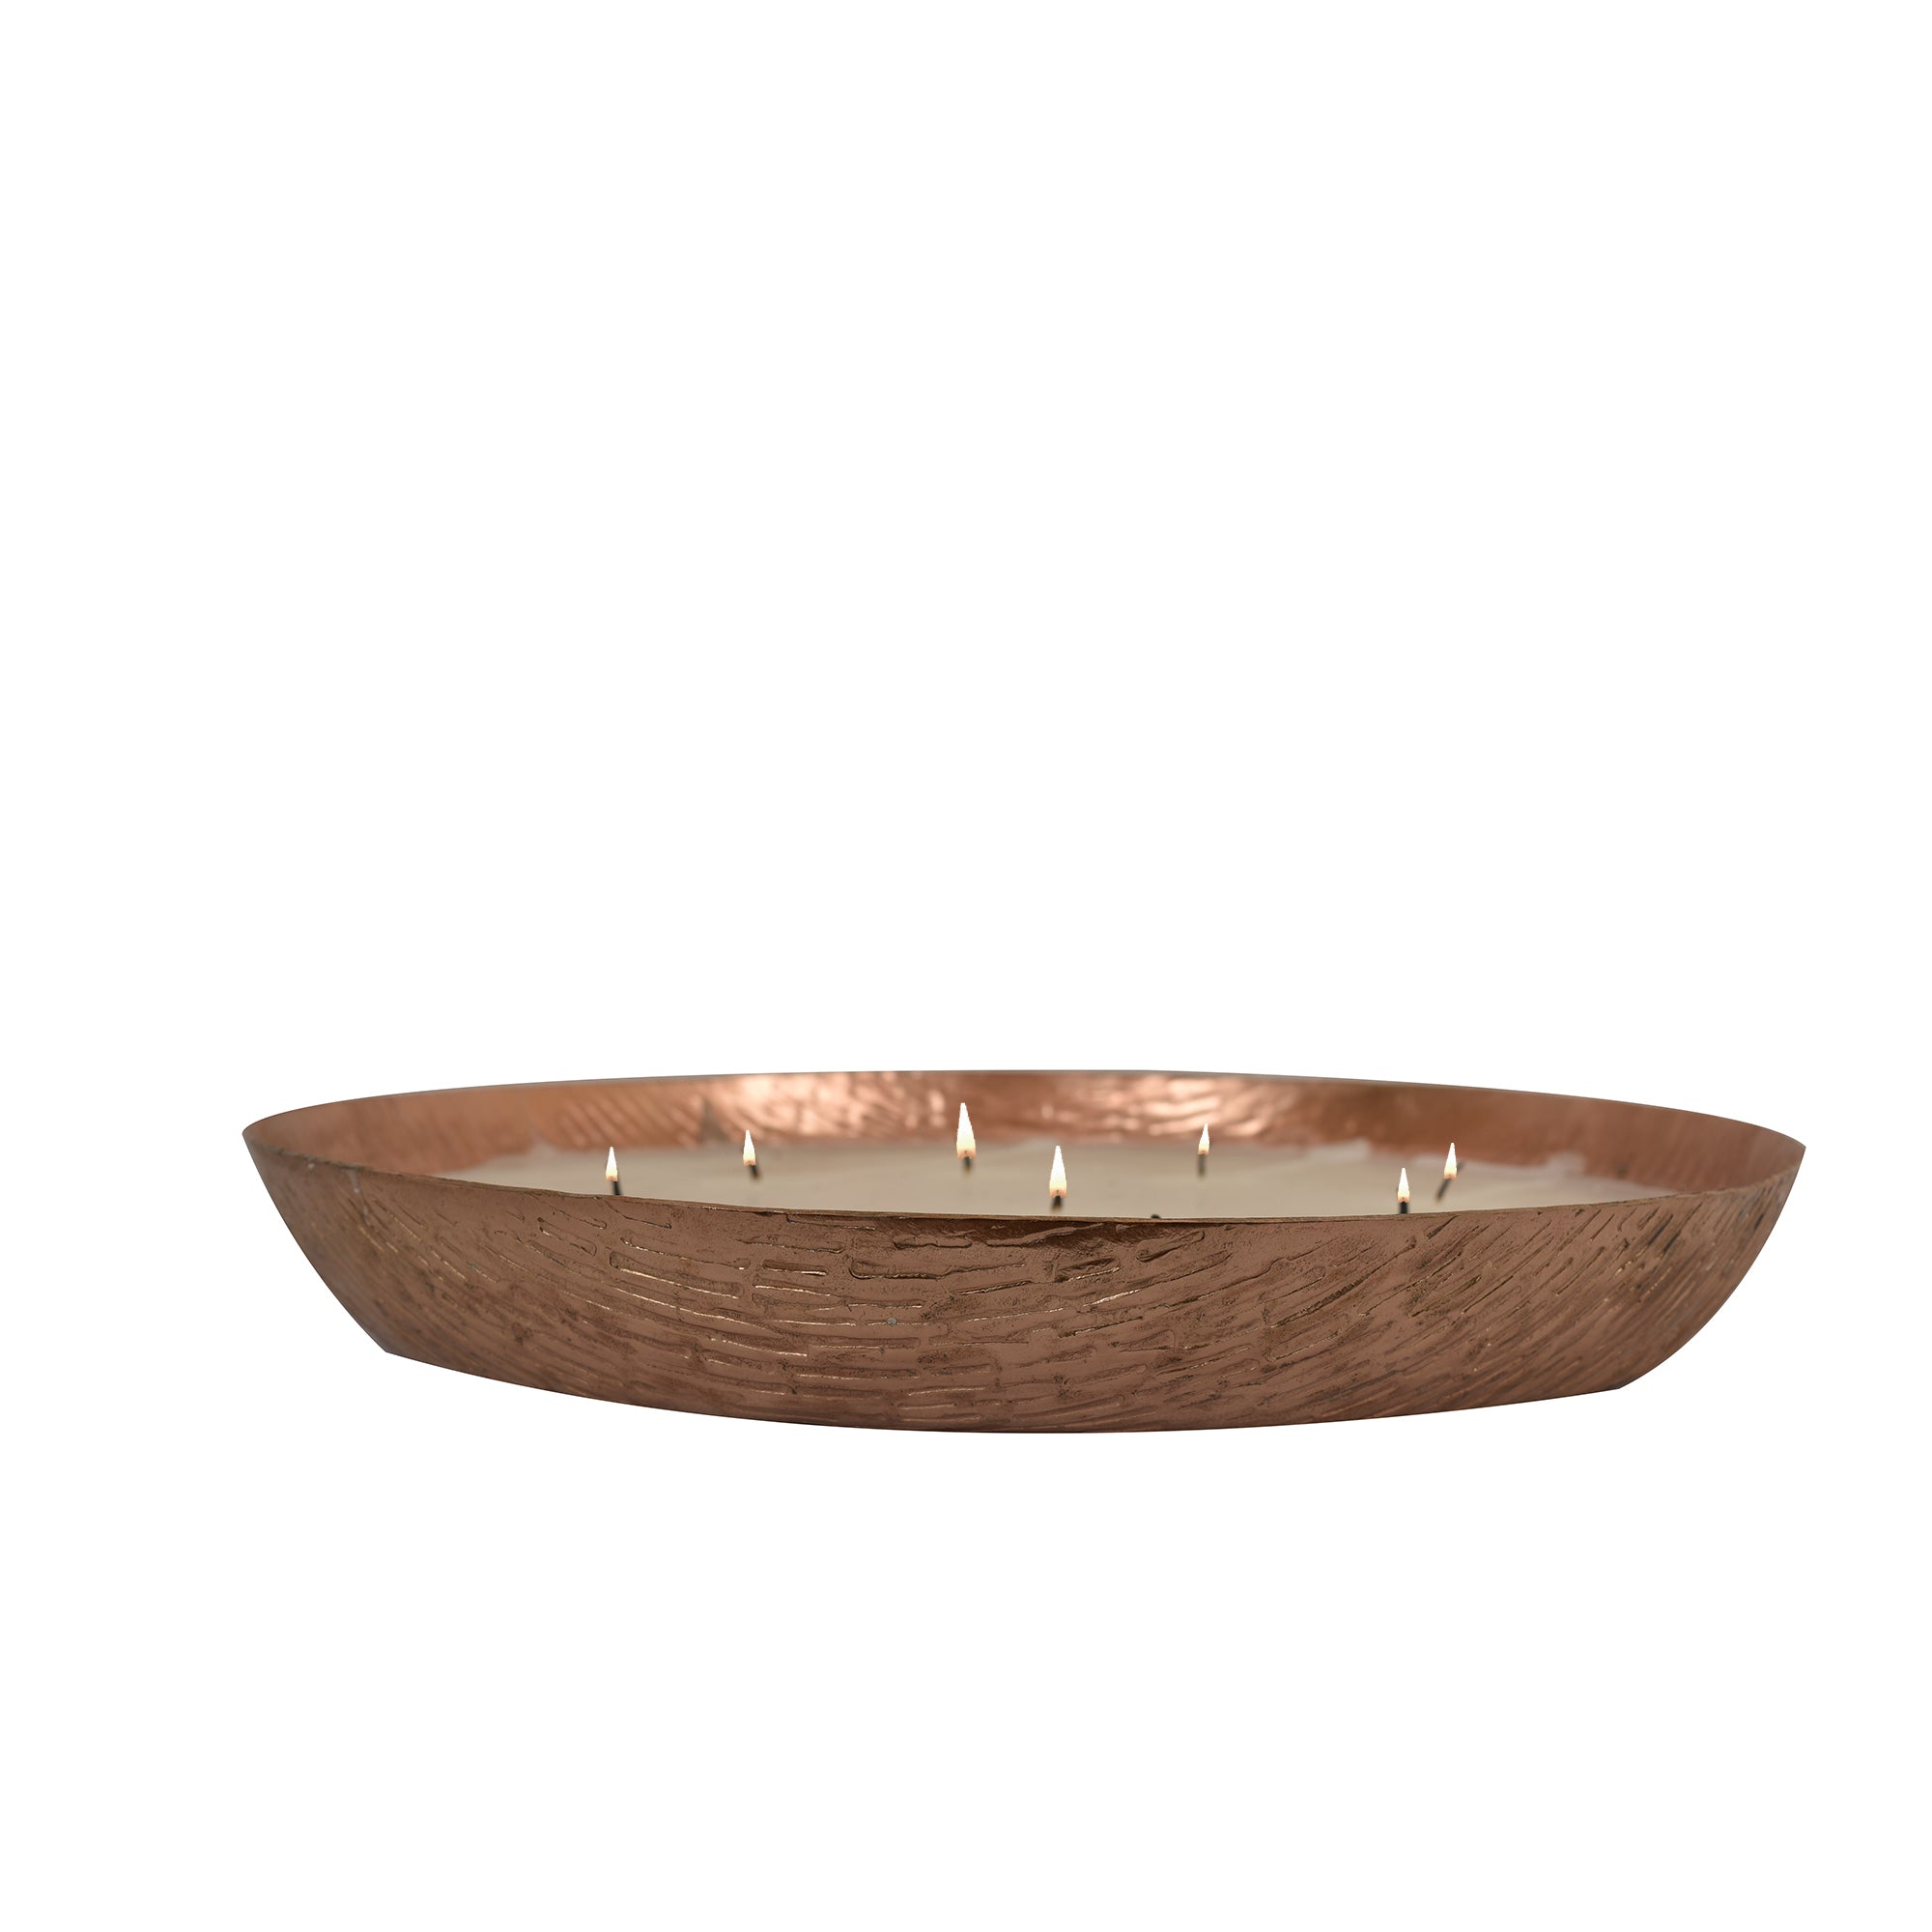 Roshni Scented Flovored Wax Filled Metal Bowl Urli 12 inches